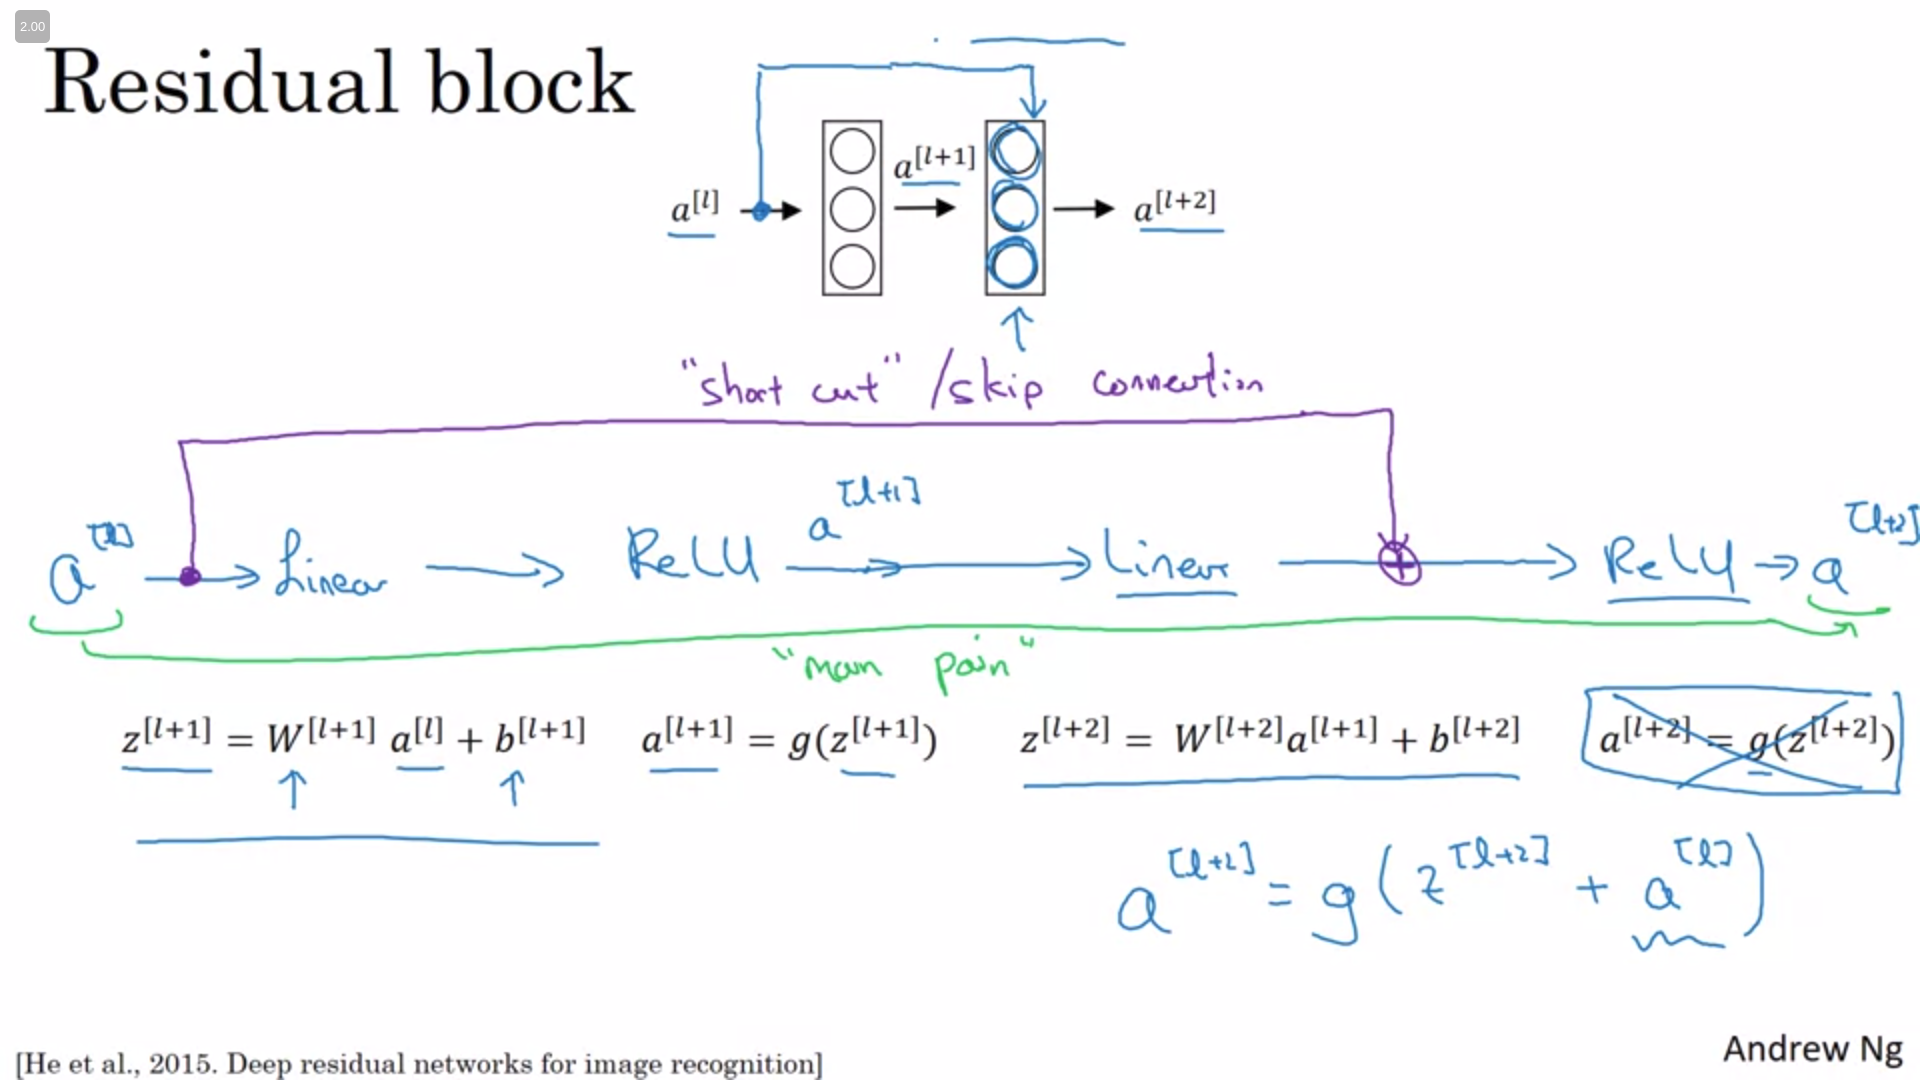 explanation of how a regular block of residual information is used and how the skip connection takes place